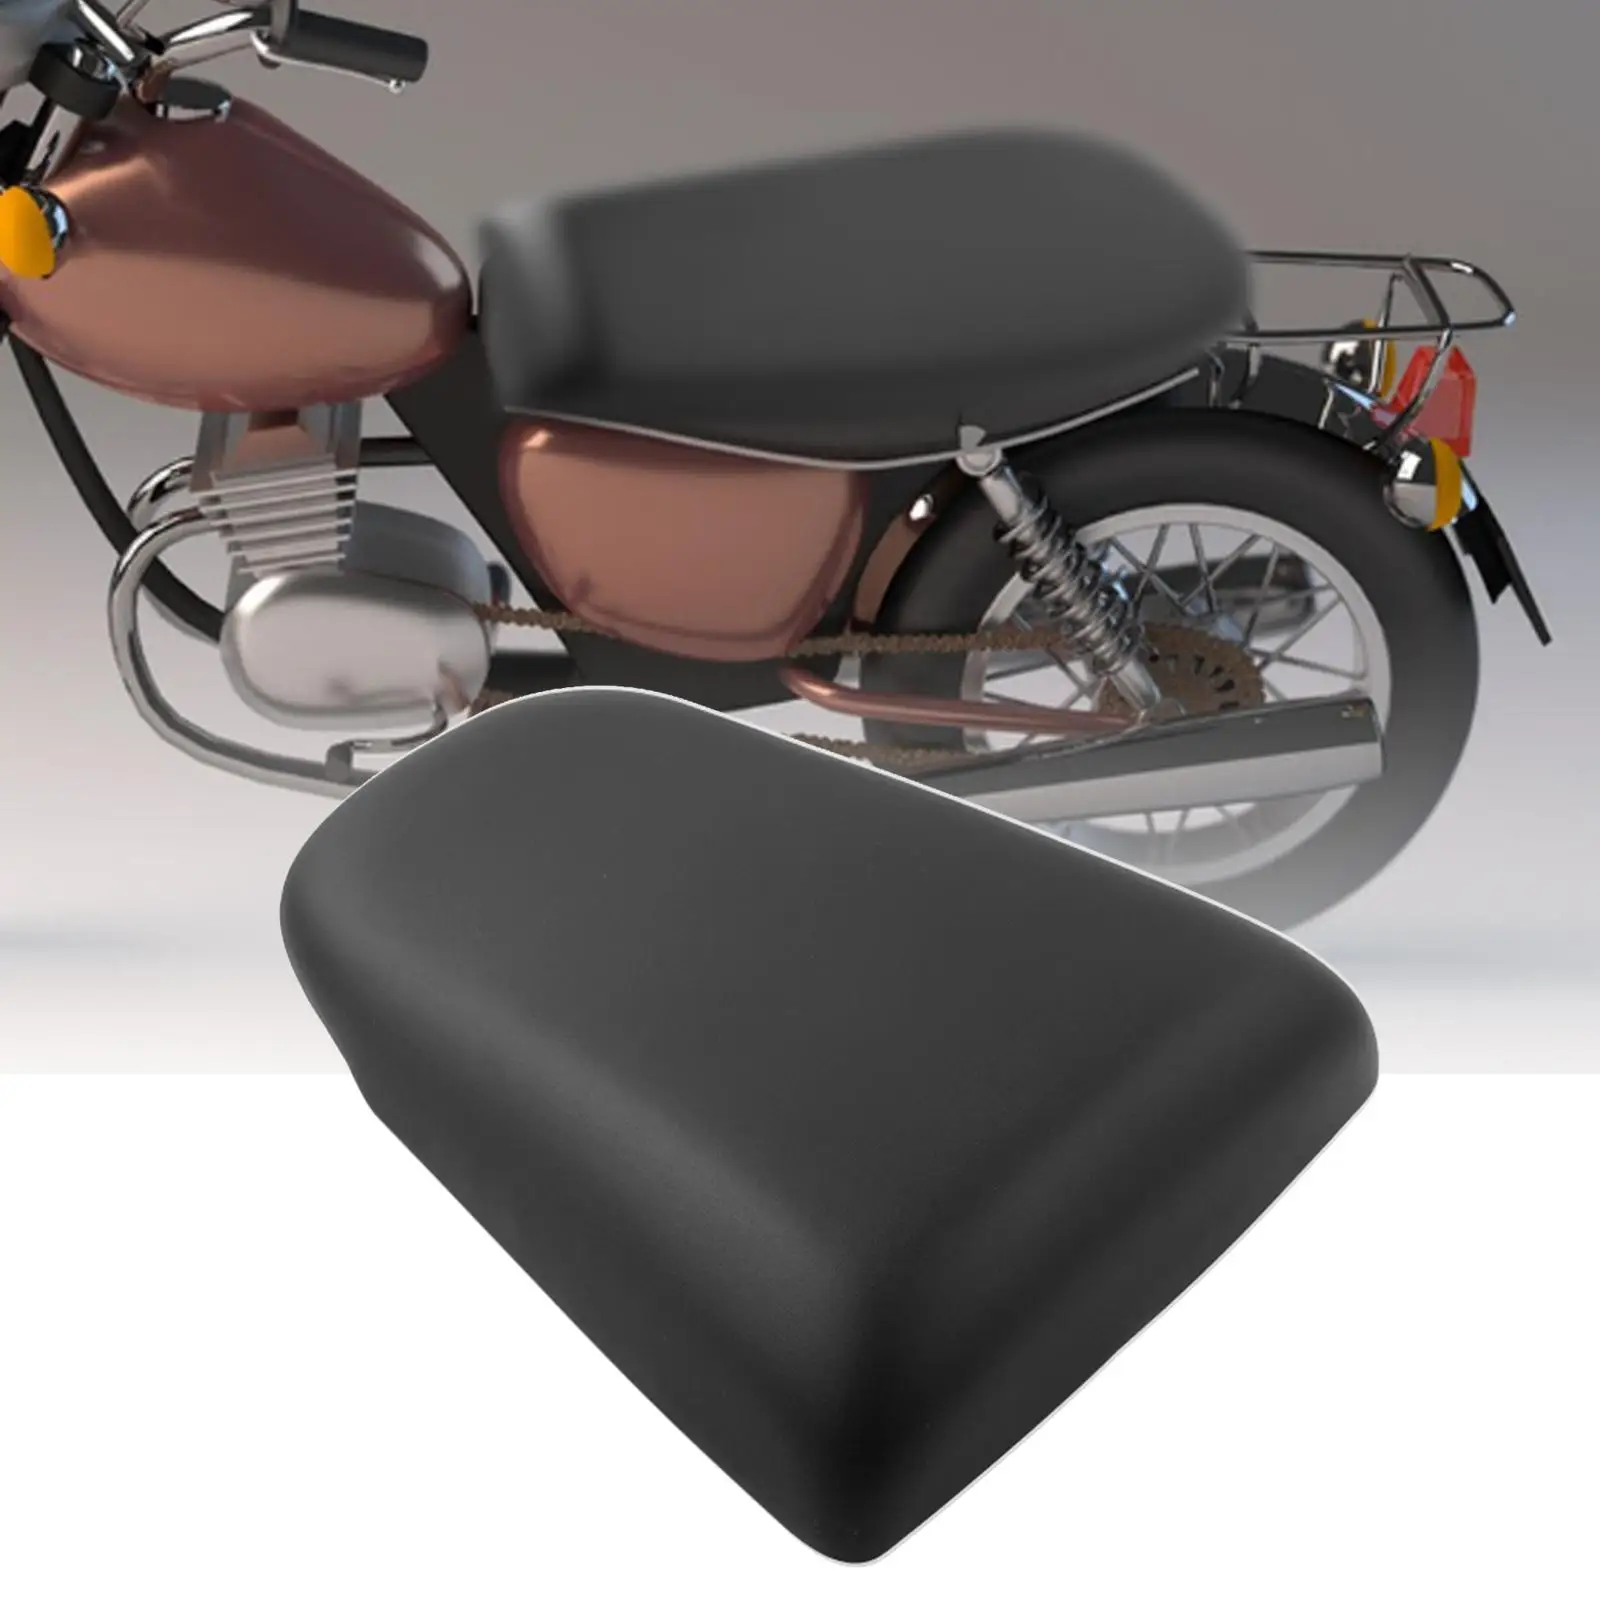 Rear Pillion Passenger Cushion Seat PU Leather Accessories for Suzuki Sv1000 Replacement Stable Performance Easy to Install